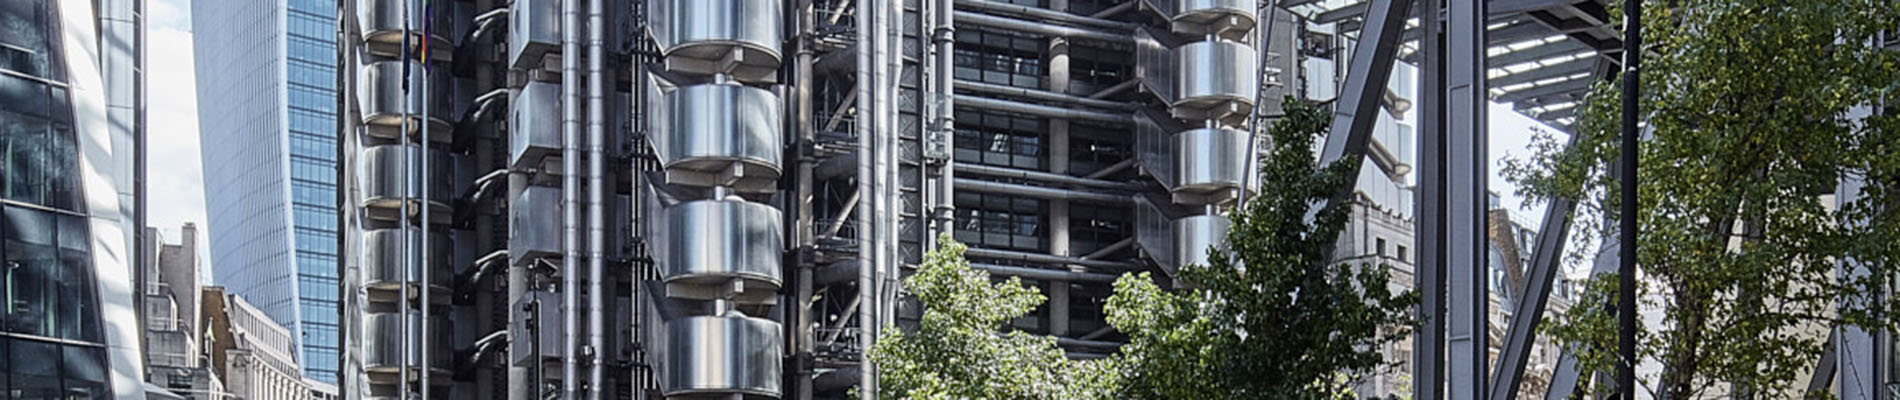 Exterior of the Lloyd's building